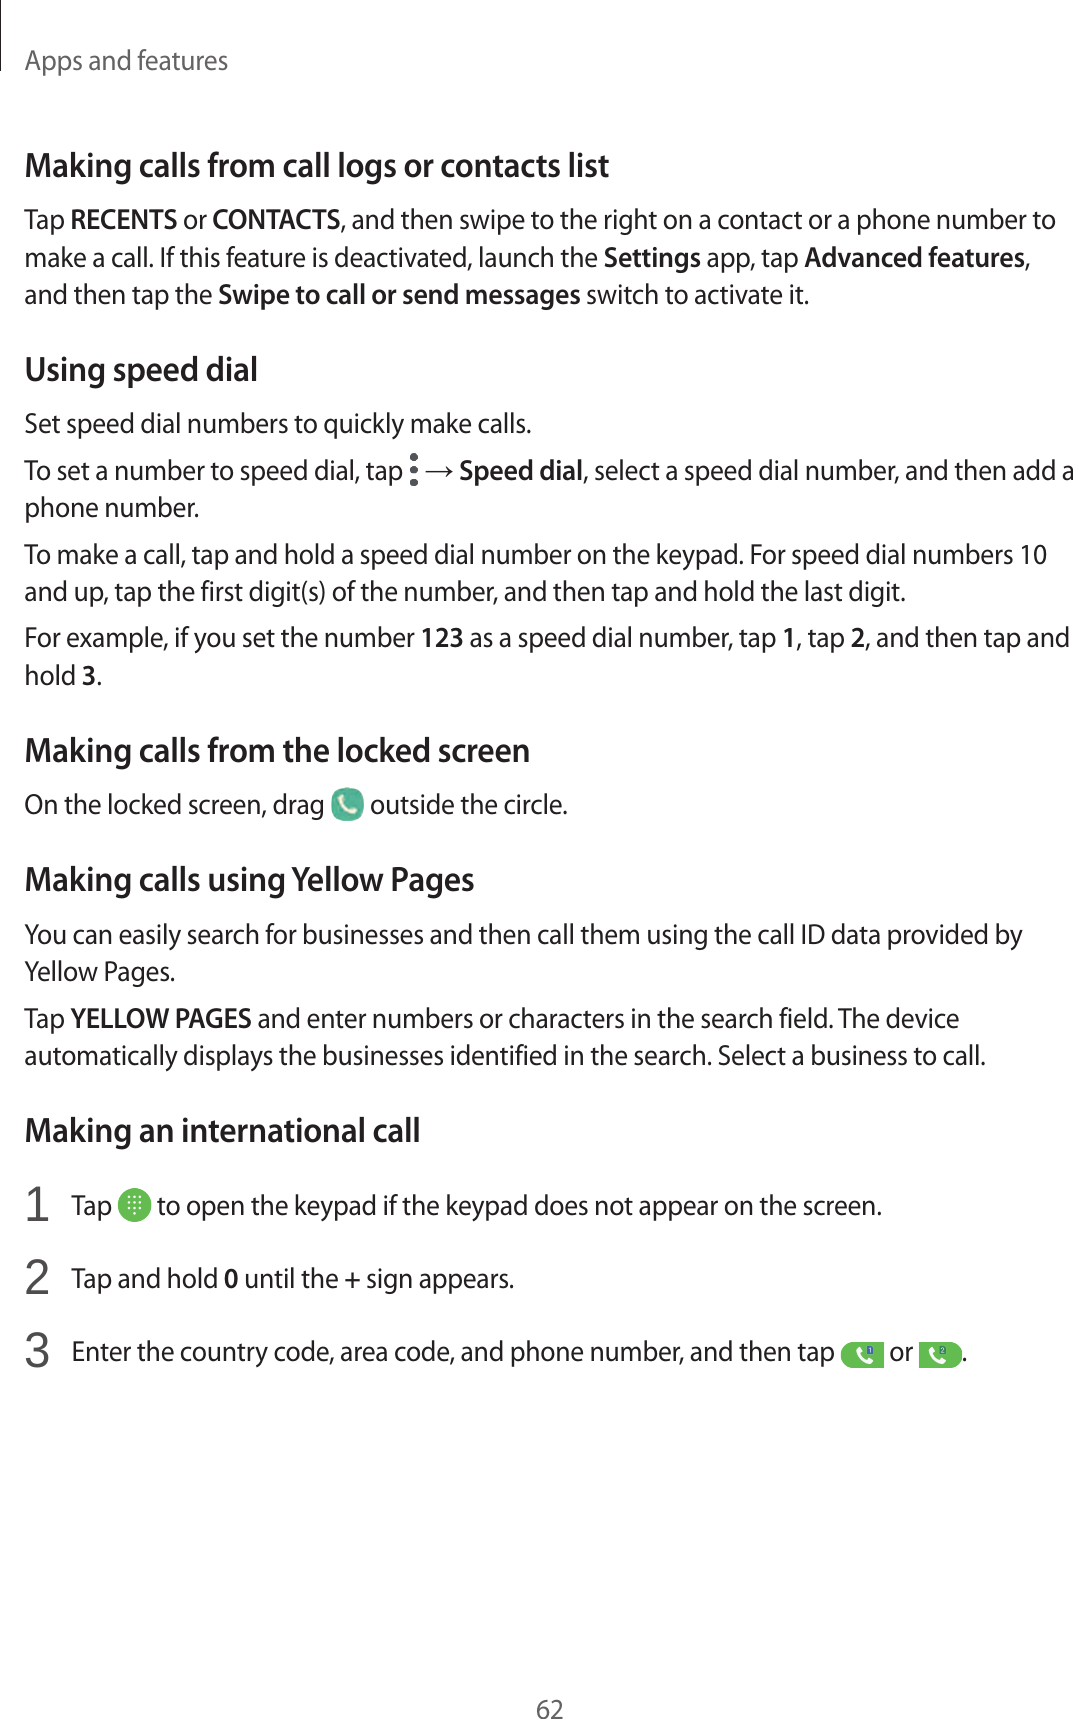 Apps and features62Making calls from call logs or contacts listTap RECENTS or CONTACTS, and then swipe to the right on a contact or a phone number to make a call. If this feature is deactivated, launch the Settings app, tap Advanced features, and then tap the Swipe to call or send messages switch to activate it.Using speed dialSet speed dial numbers to quickly make calls.To set a number to speed dial, tap   → Speed dial, select a speed dial number, and then add a phone number.To make a call, tap and hold a speed dial number on the keypad. For speed dial numbers 10 and up, tap the first digit(s) of the number, and then tap and hold the last digit.For example, if you set the number 123 as a speed dial number, tap 1, tap 2, and then tap and hold 3.Making calls from the locked screenOn the locked screen, drag   outside the circle.Making calls using Yellow PagesYou can easily search for businesses and then call them using the call ID data provided by Yellow Pages.Tap YELLOW PAGES and enter numbers or characters in the search field. The device automatically displays the businesses identified in the search. Select a business to call.Making an international call1  Tap   to open the keypad if the keypad does not appear on the screen.2  Tap and hold 0 until the + sign appears.3  Enter the country code, area code, and phone number, and then tap   or  .